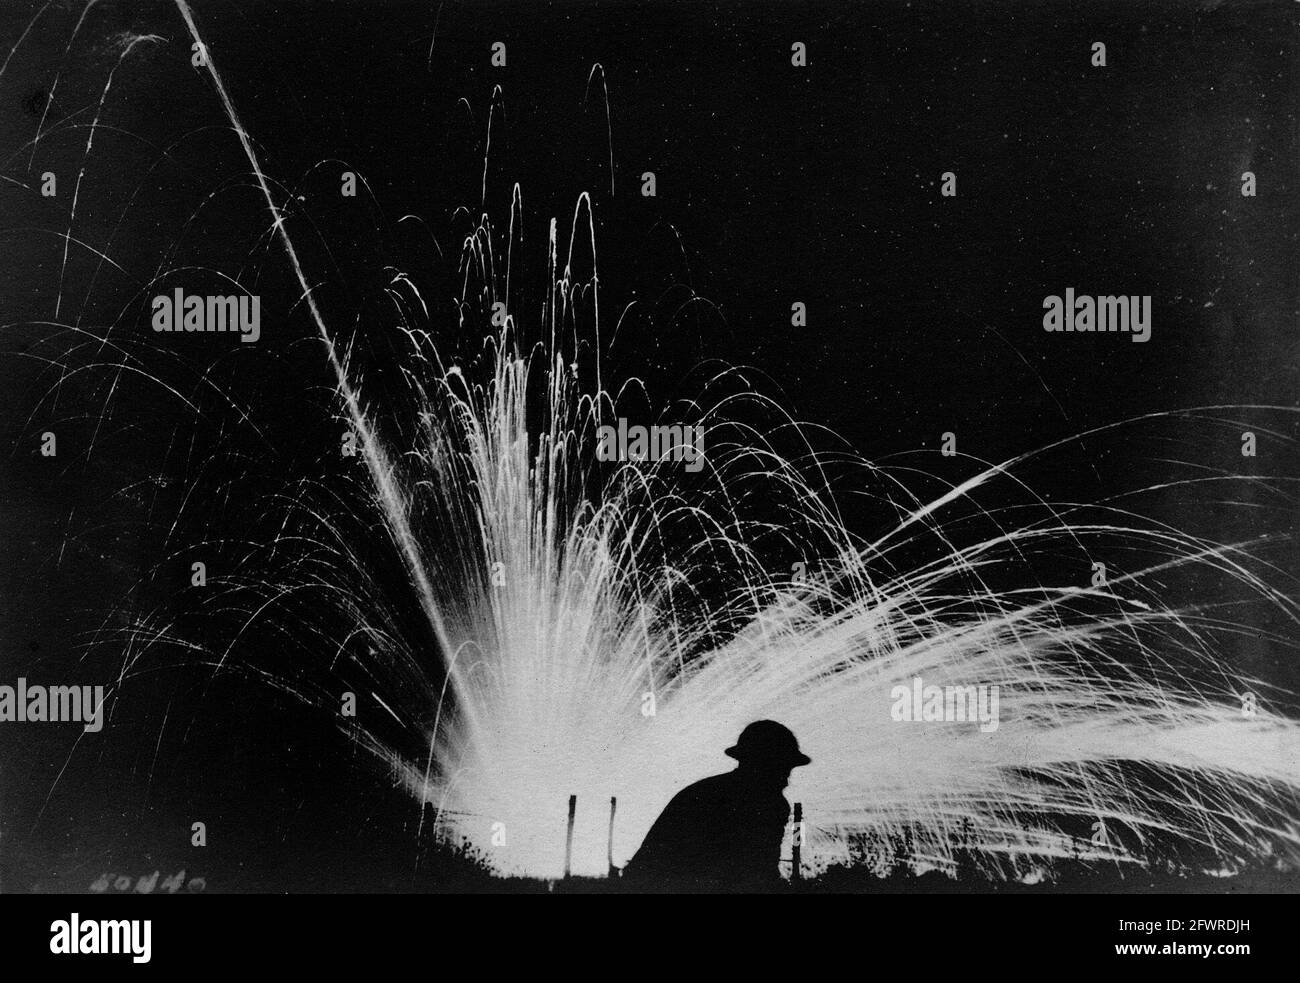 A phosphorous shell exploding in ‘no man’s land’ during a night attack. A soldier silhouetted against the blast is in danger of being observed by enemy snipers. France, 1918. Stock Photo